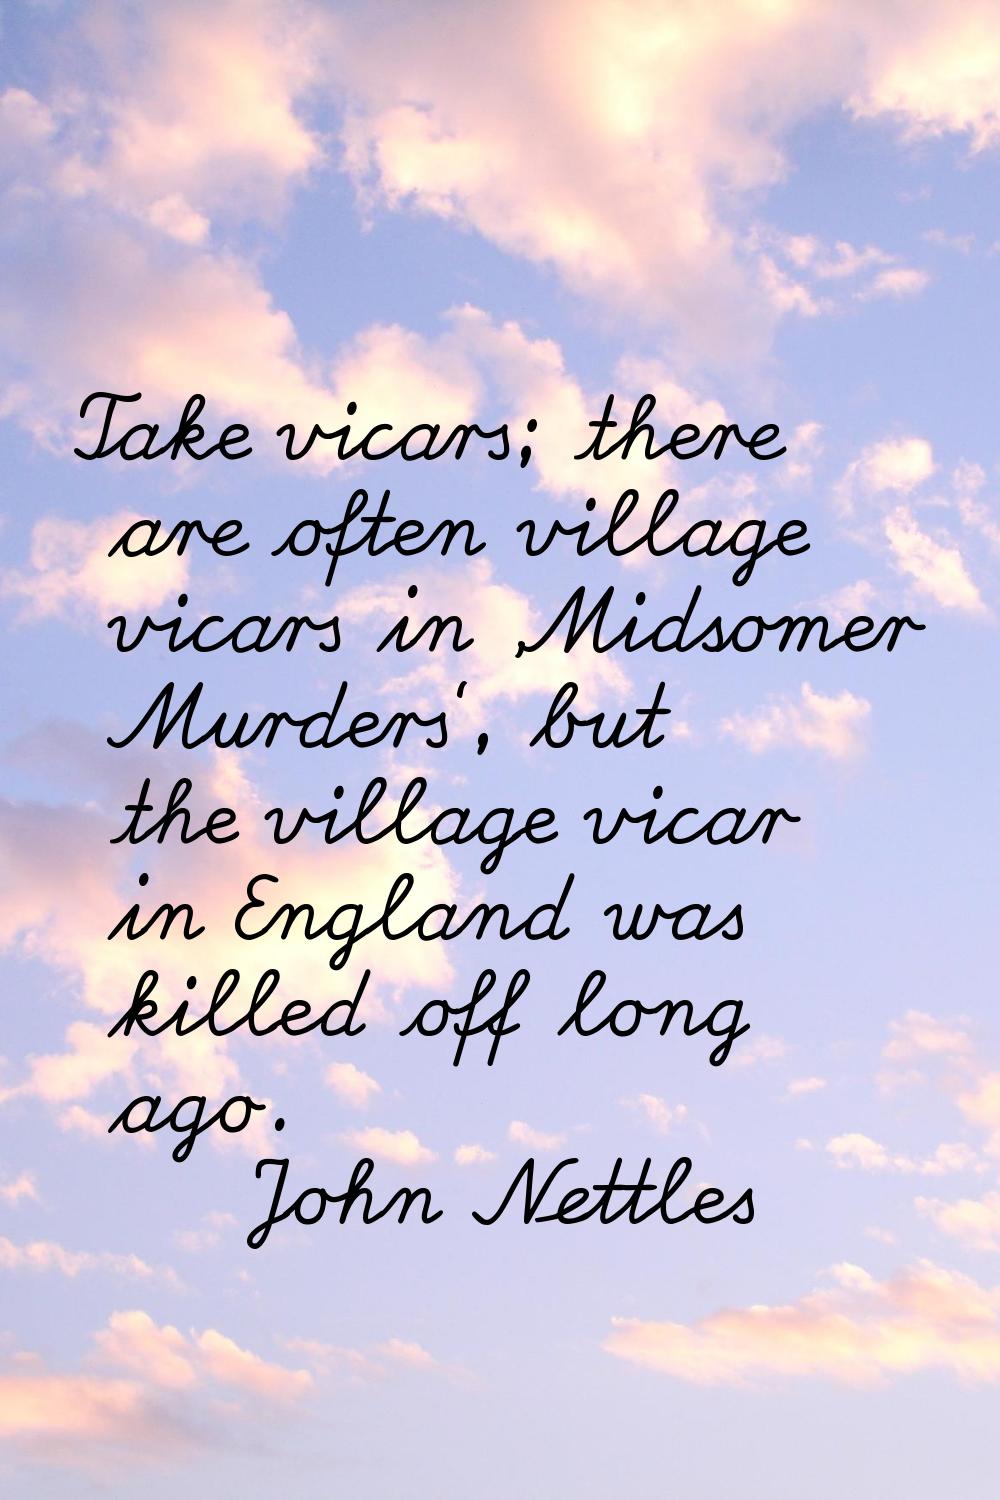 Take vicars; there are often village vicars in 'Midsomer Murders', but the village vicar in England